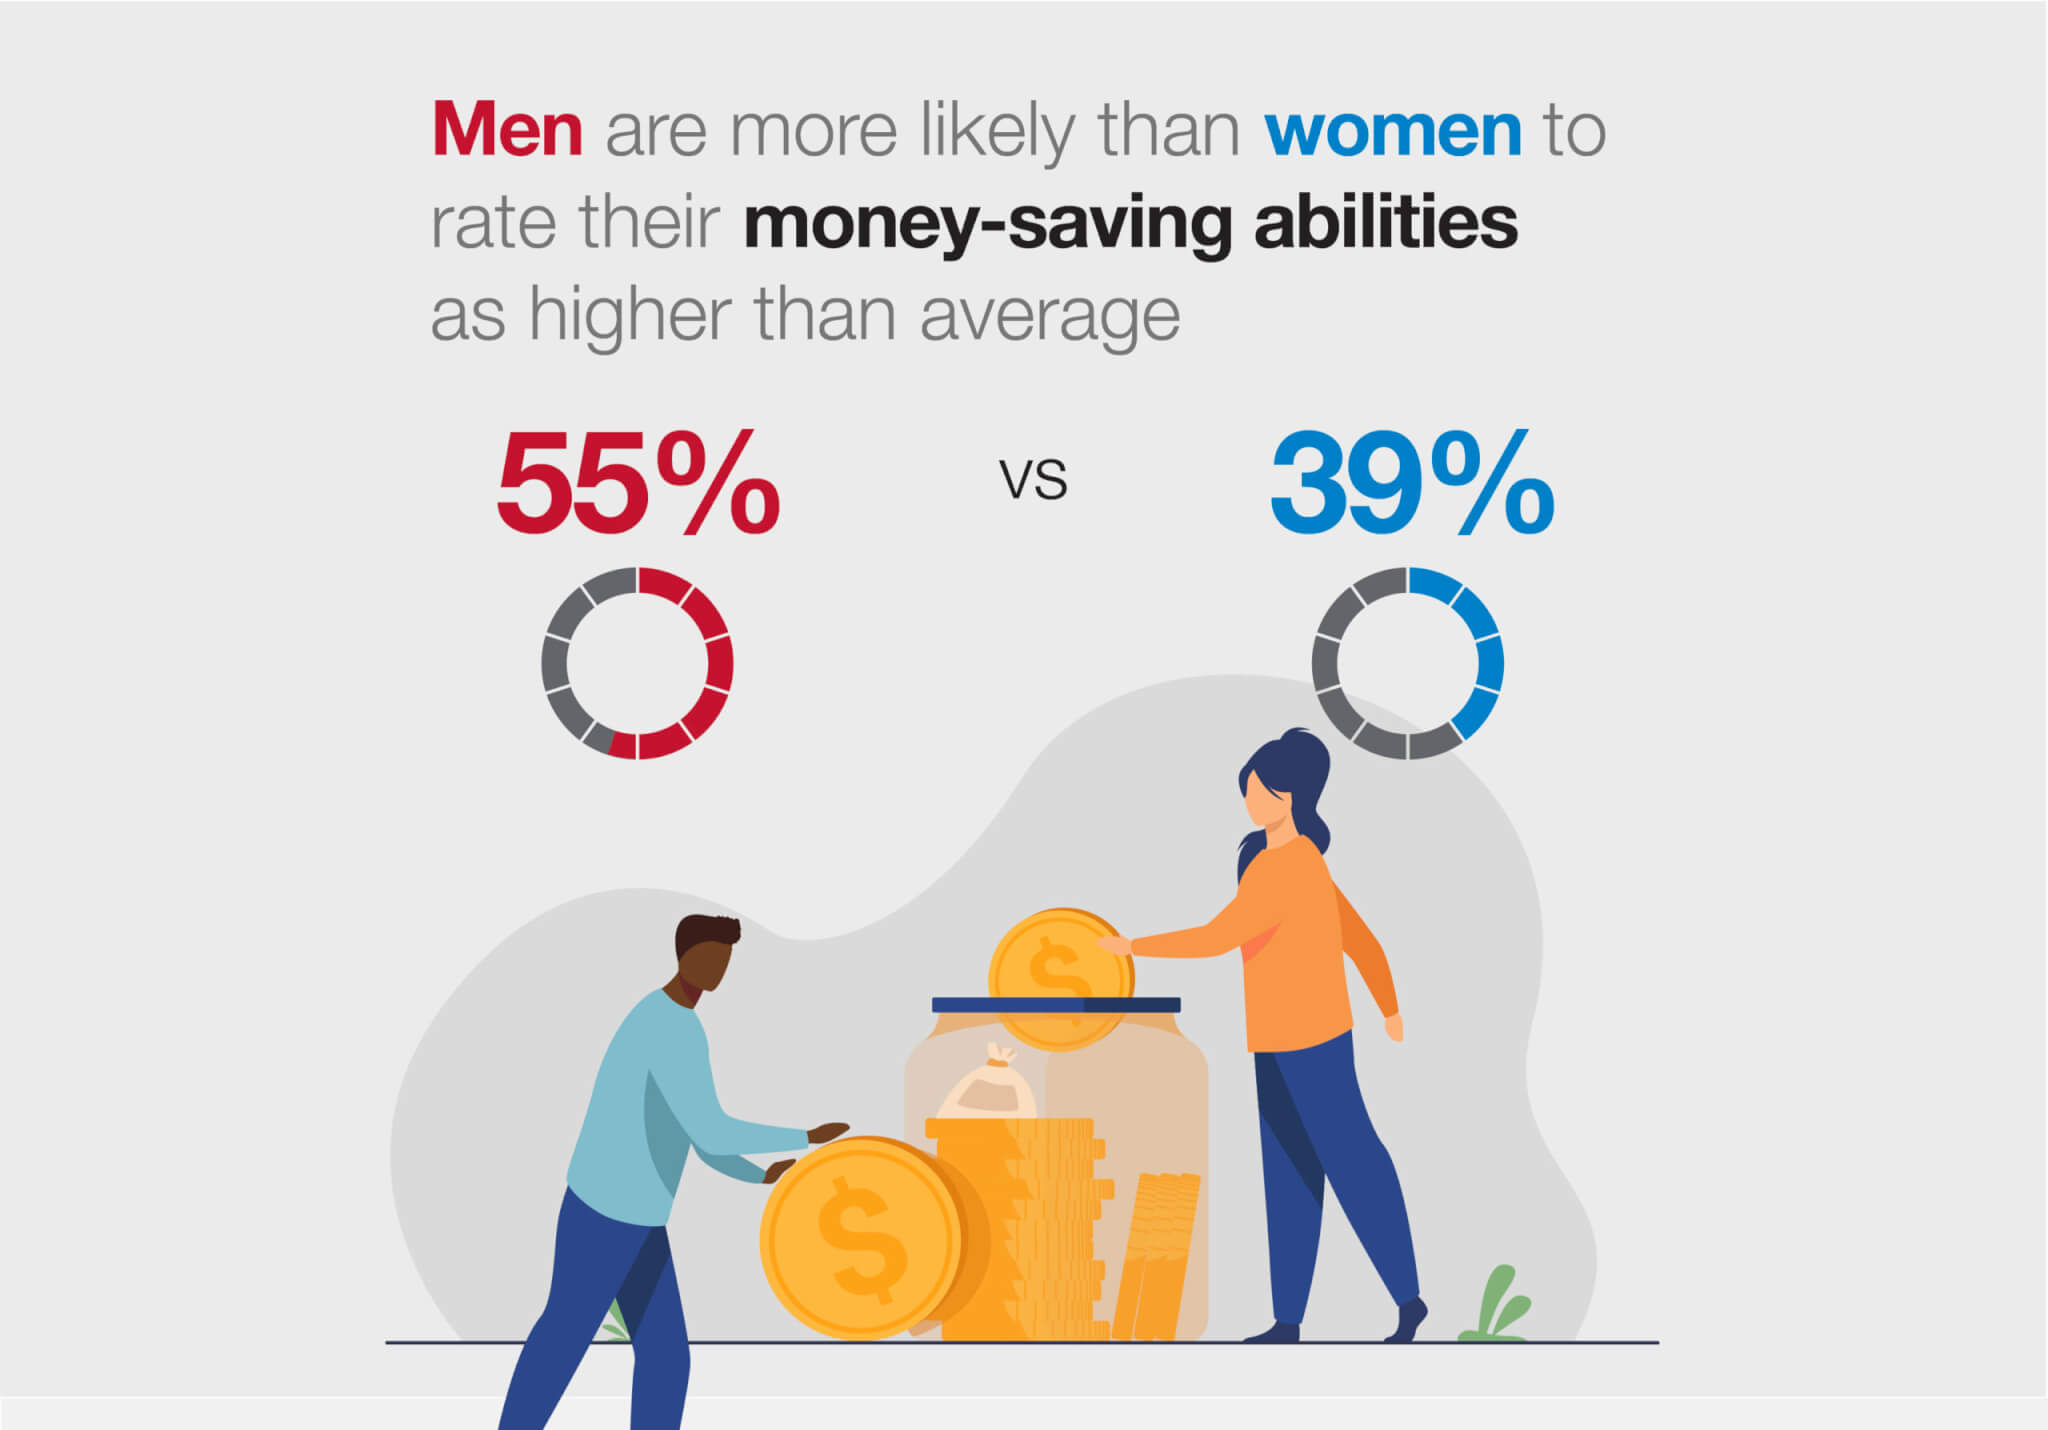 Men believe they are better at saving money than women